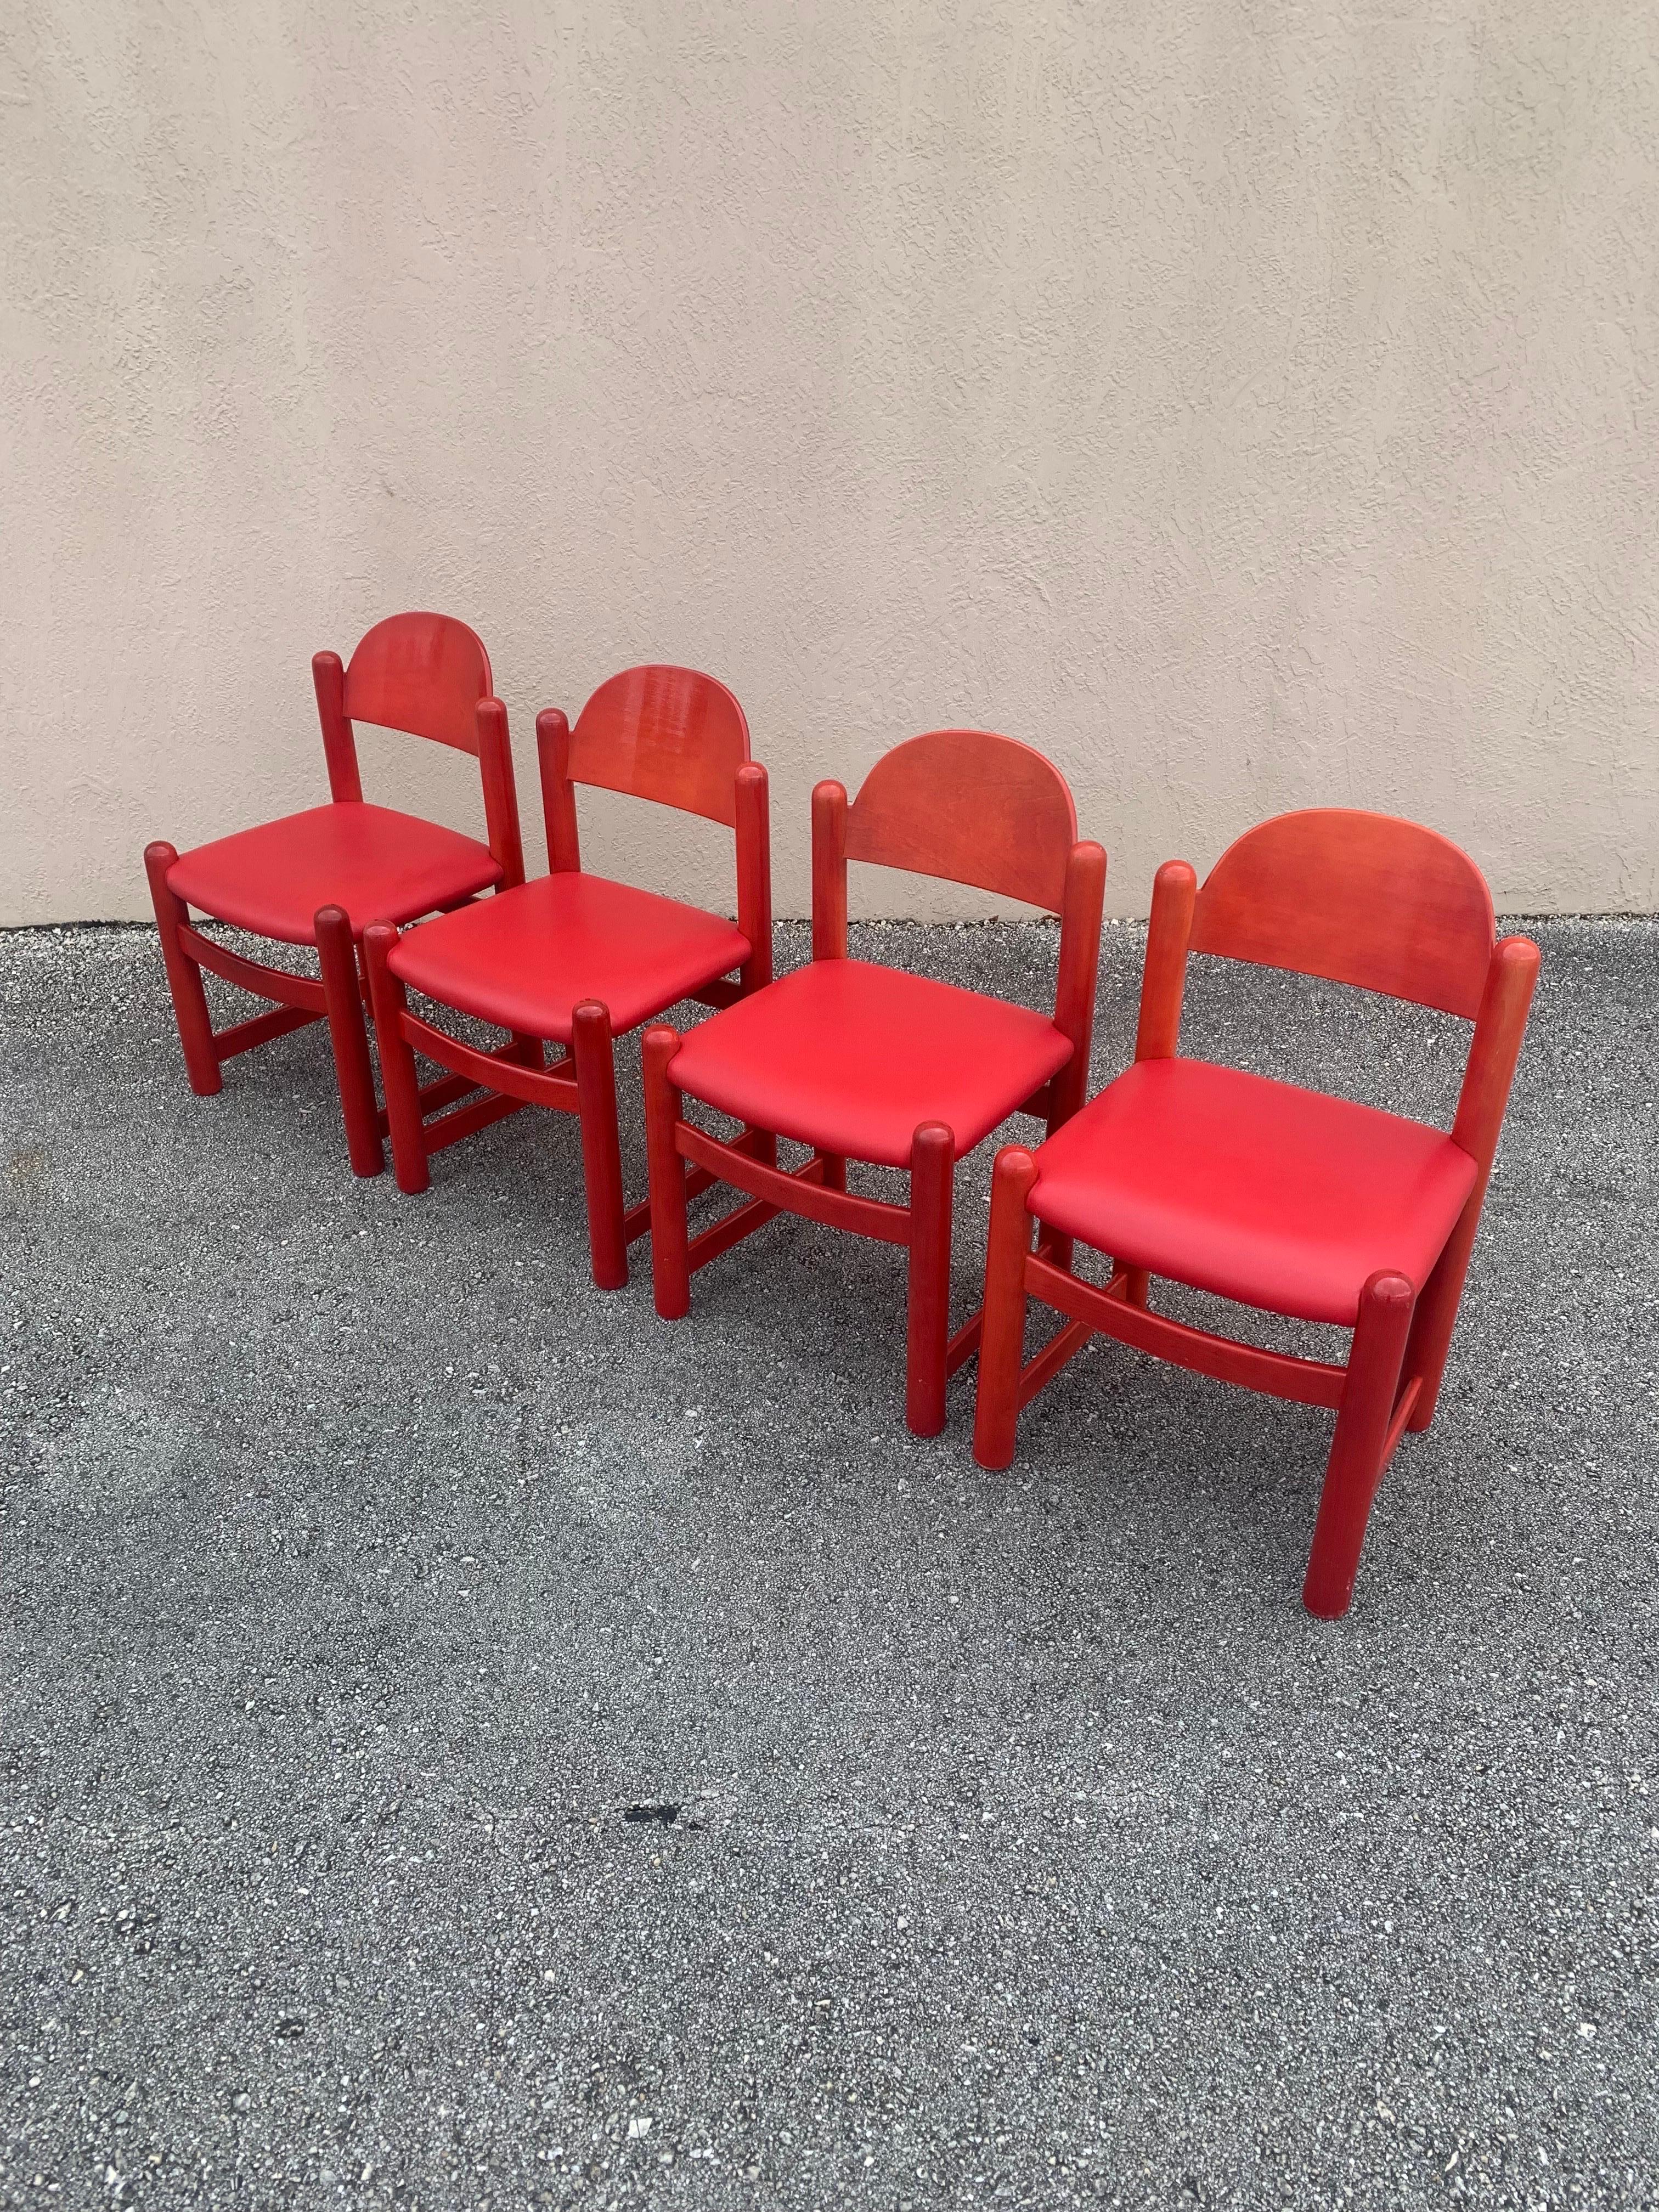 20th Century Hank Loewenstein Oak and Leather Chairs in Red, 1970s For Sale